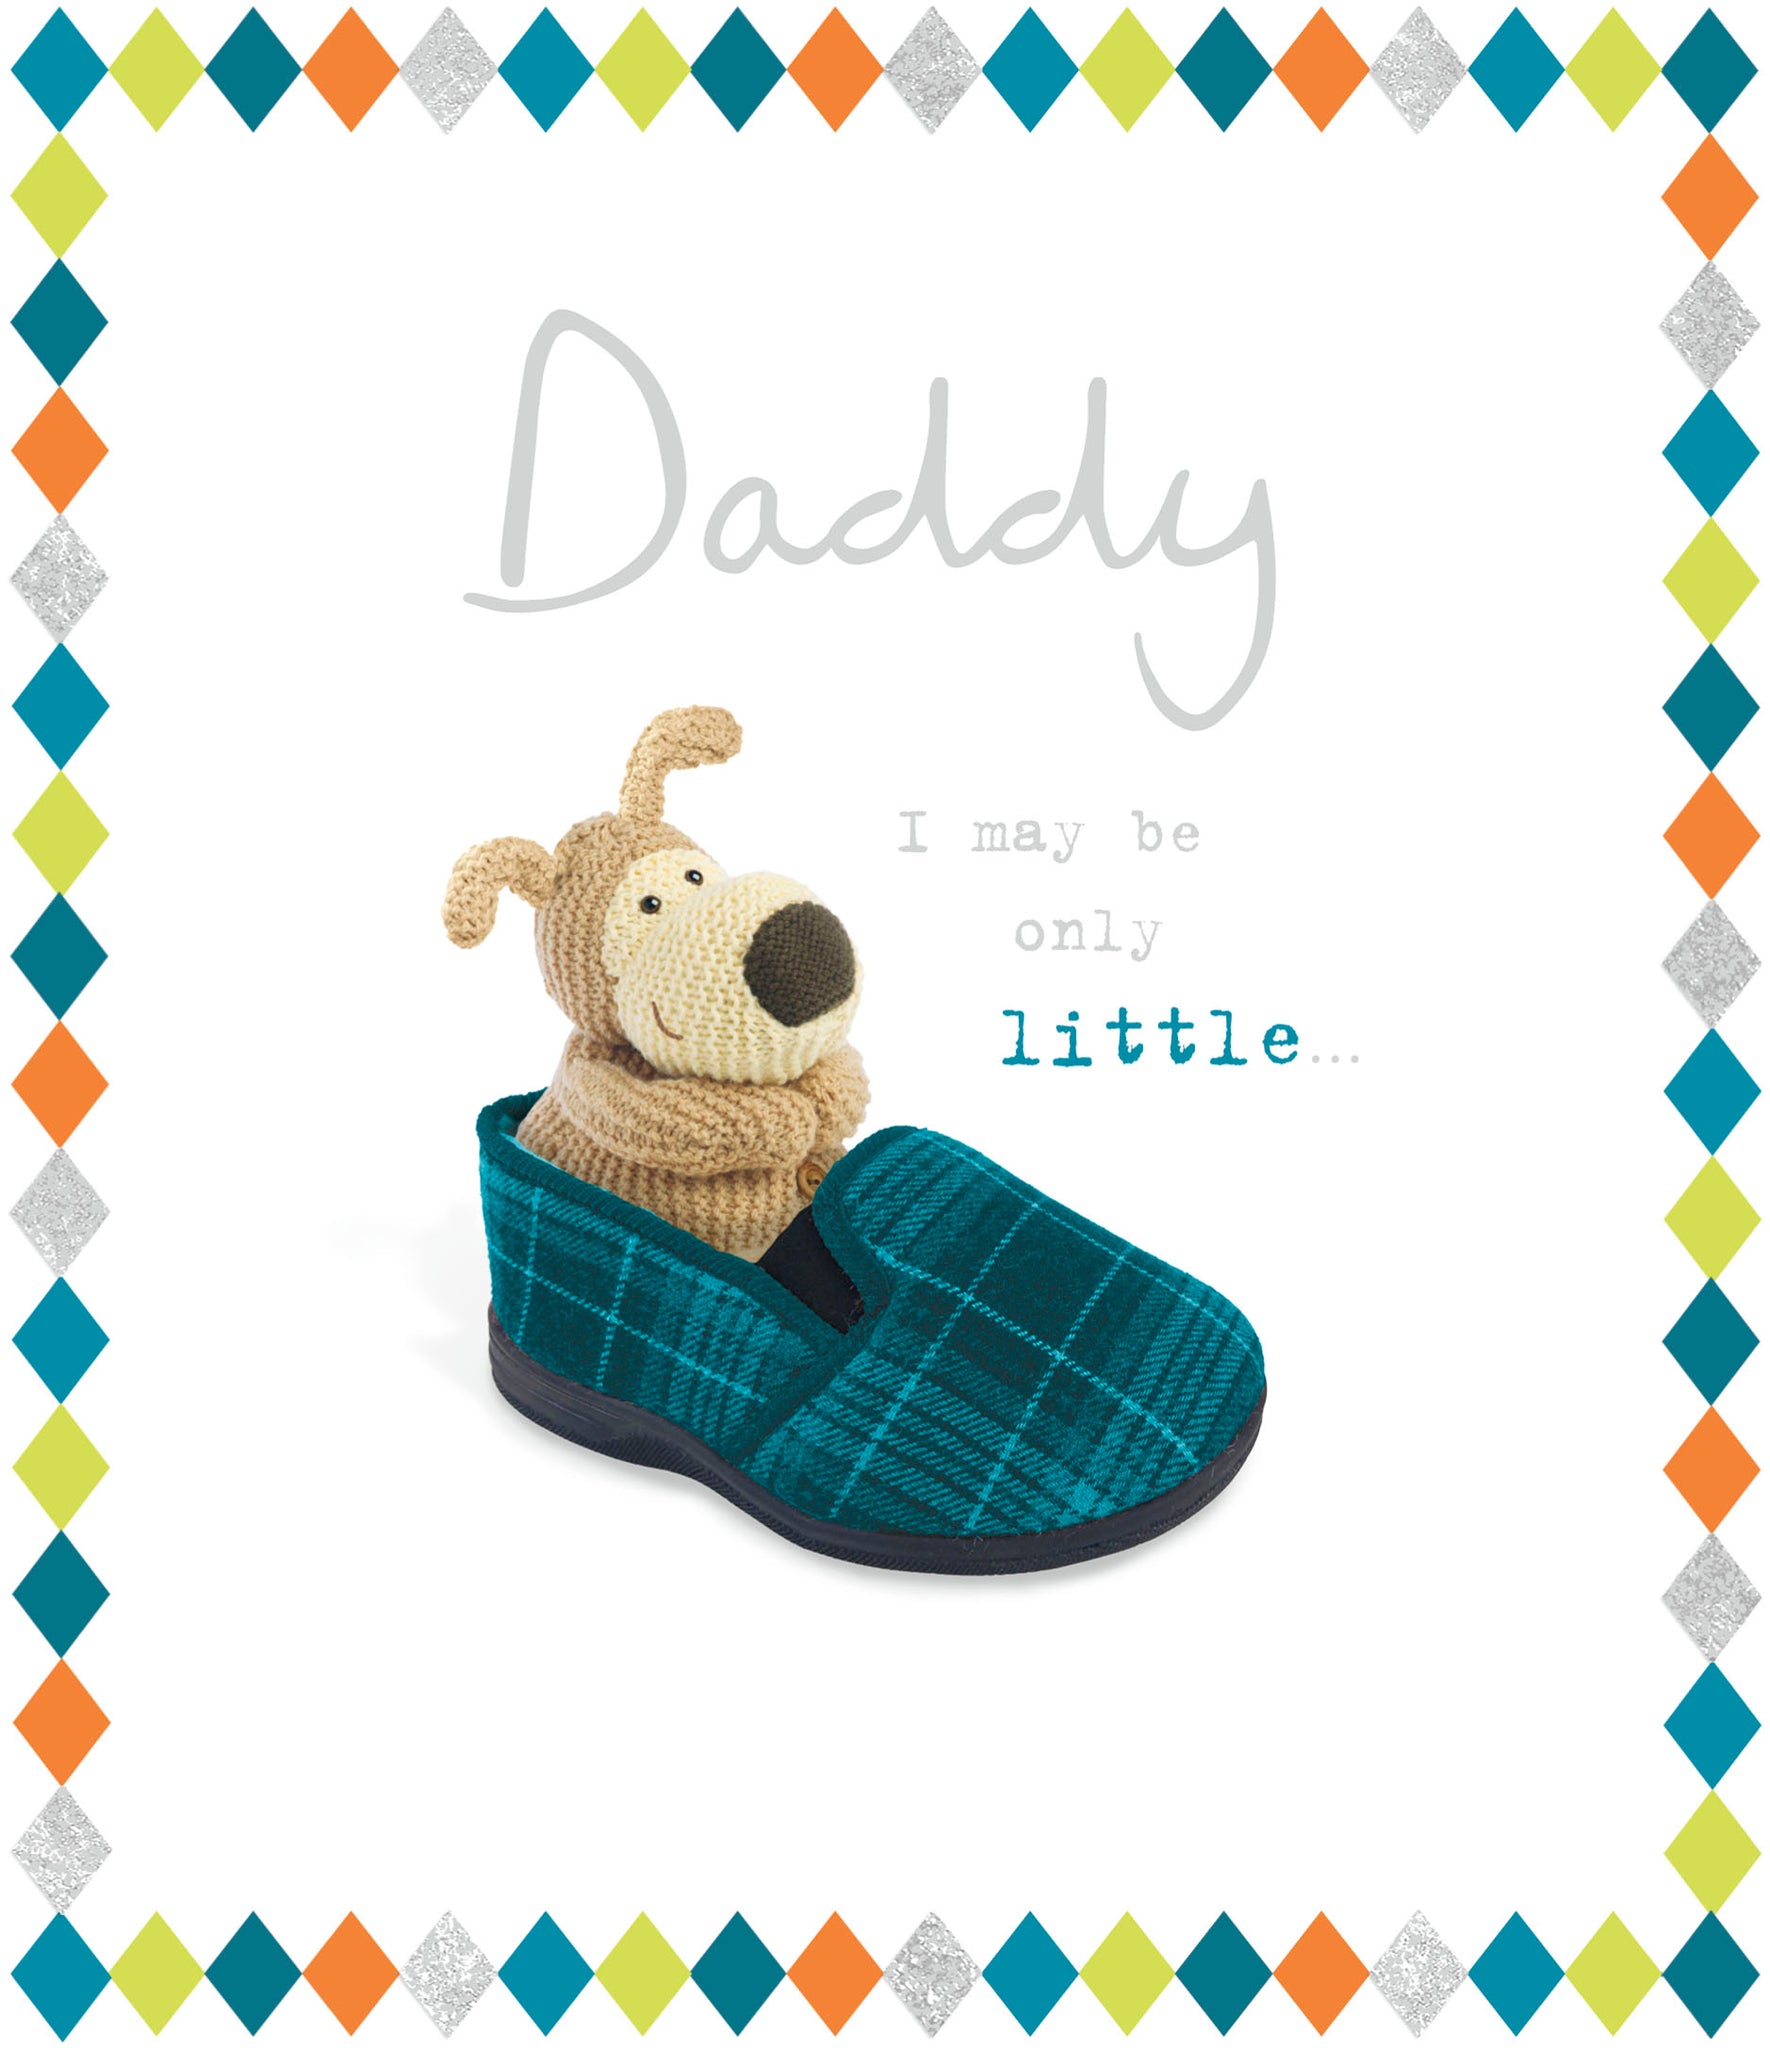 Daddy Father’s Day card- Boofle in slipper